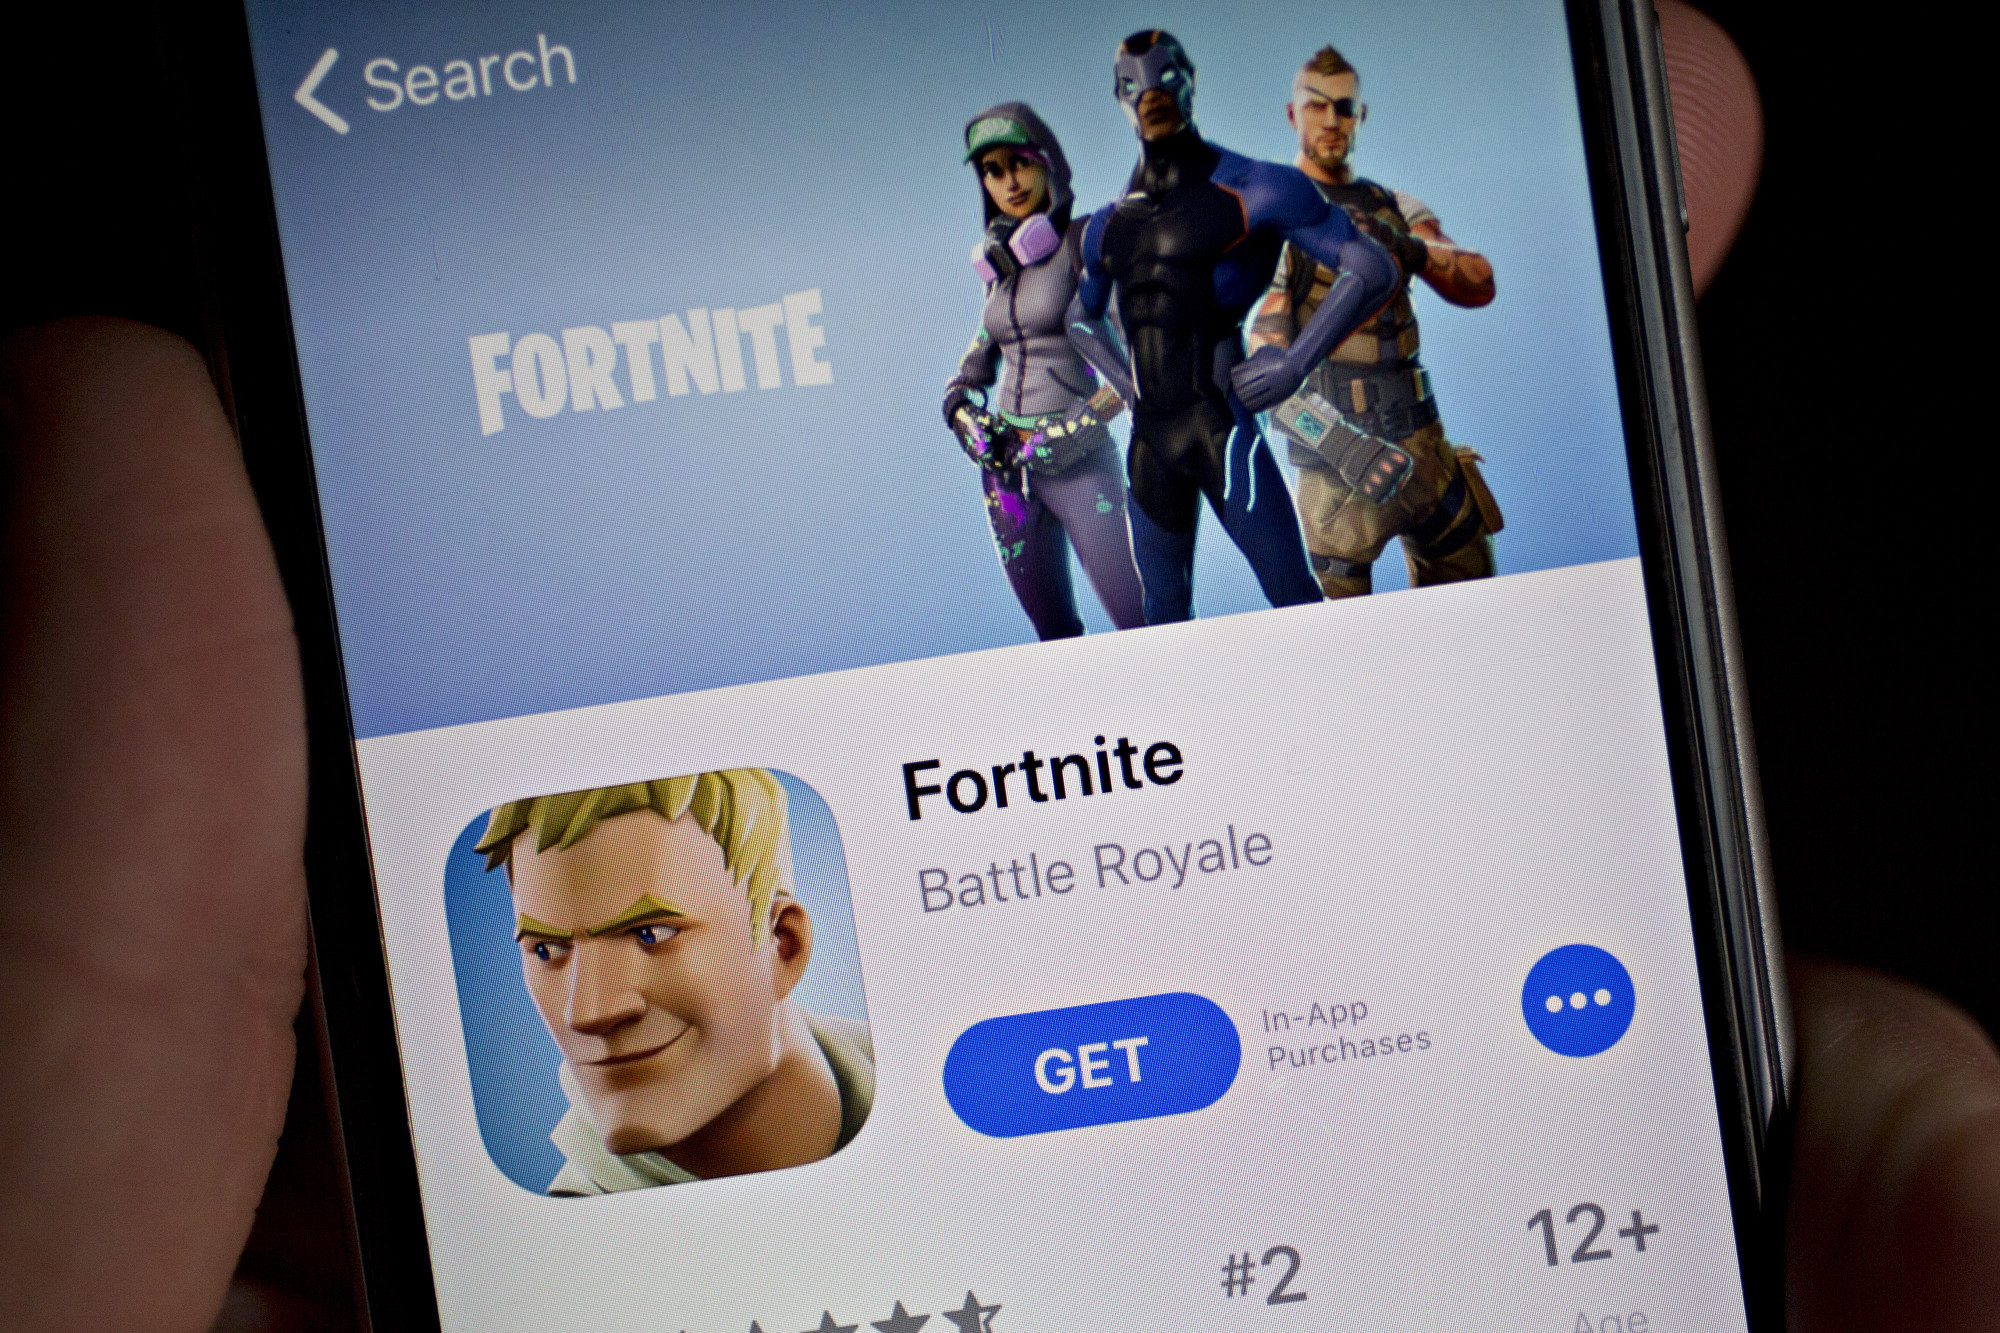 Apple and Epic Games fought in court. Here's what we expect as we